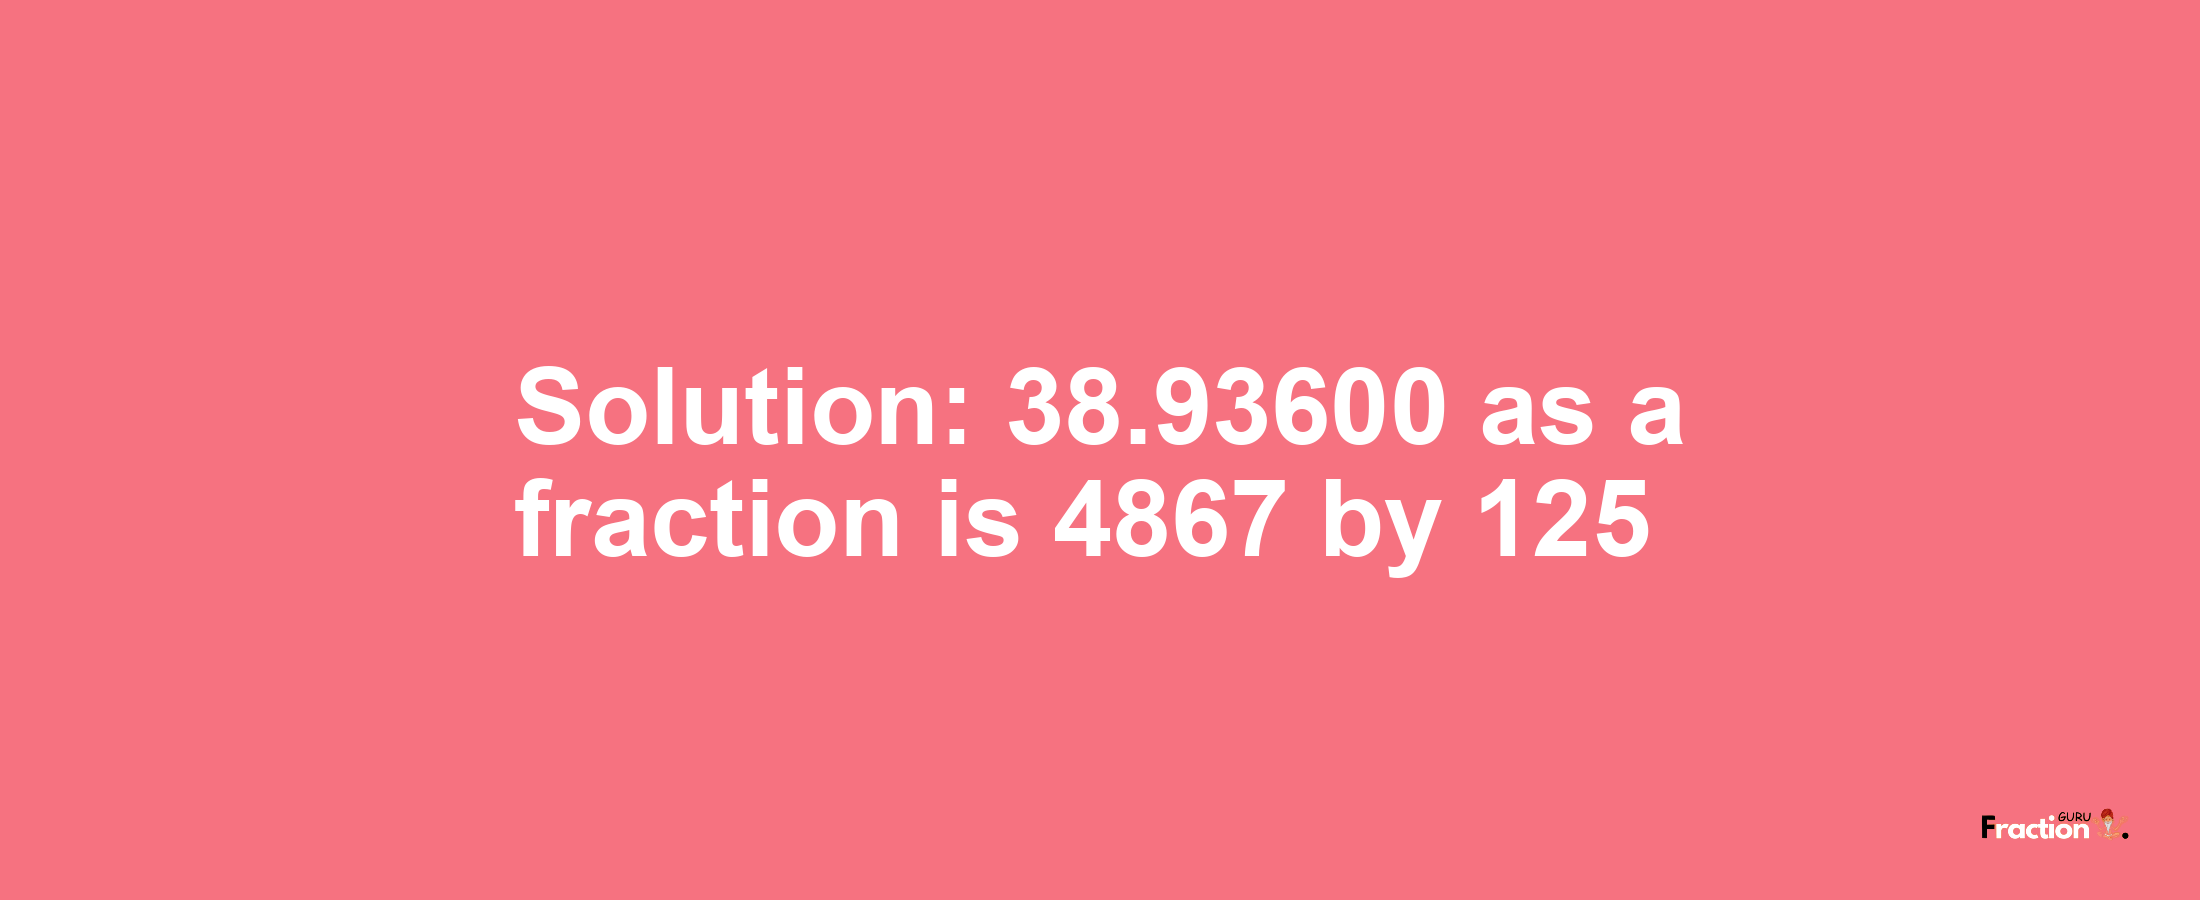 Solution:38.93600 as a fraction is 4867/125